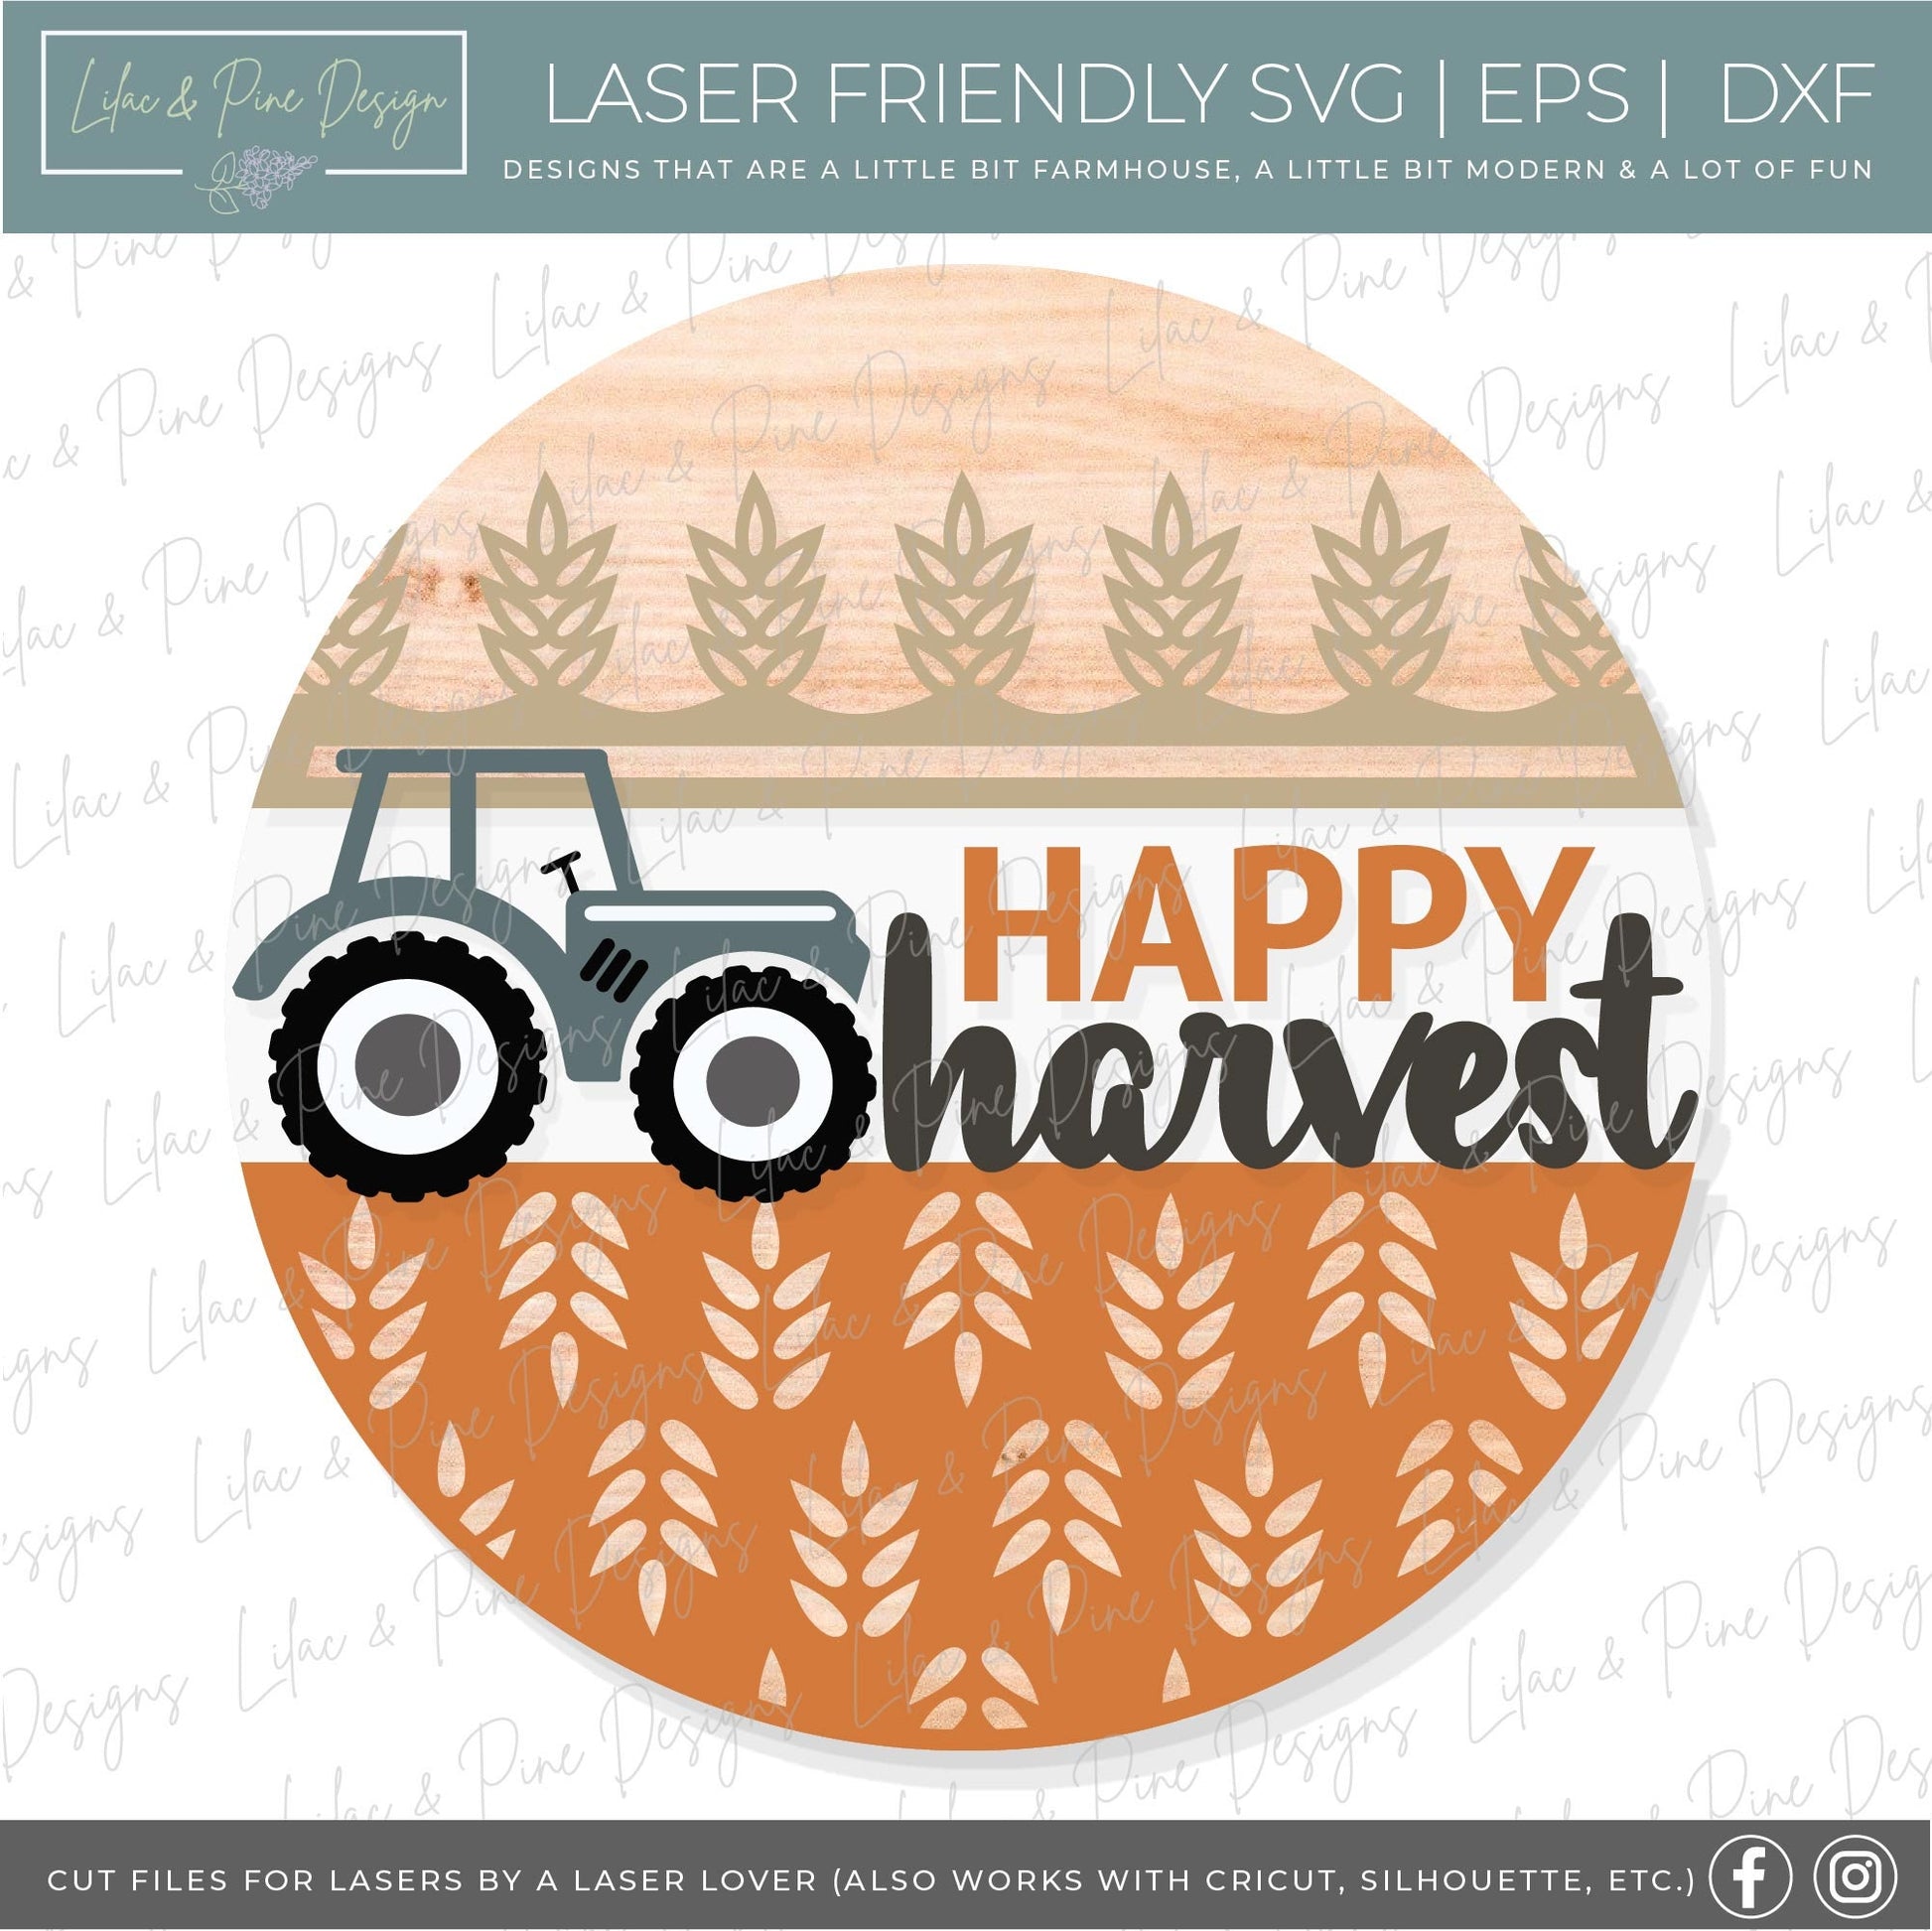 Happy Harvest door hanger SVG, Fall welcome sign SVG, Tractor round door hanger, Fall porch decor, Fall farmhouse sign, Glowforge laser SVG